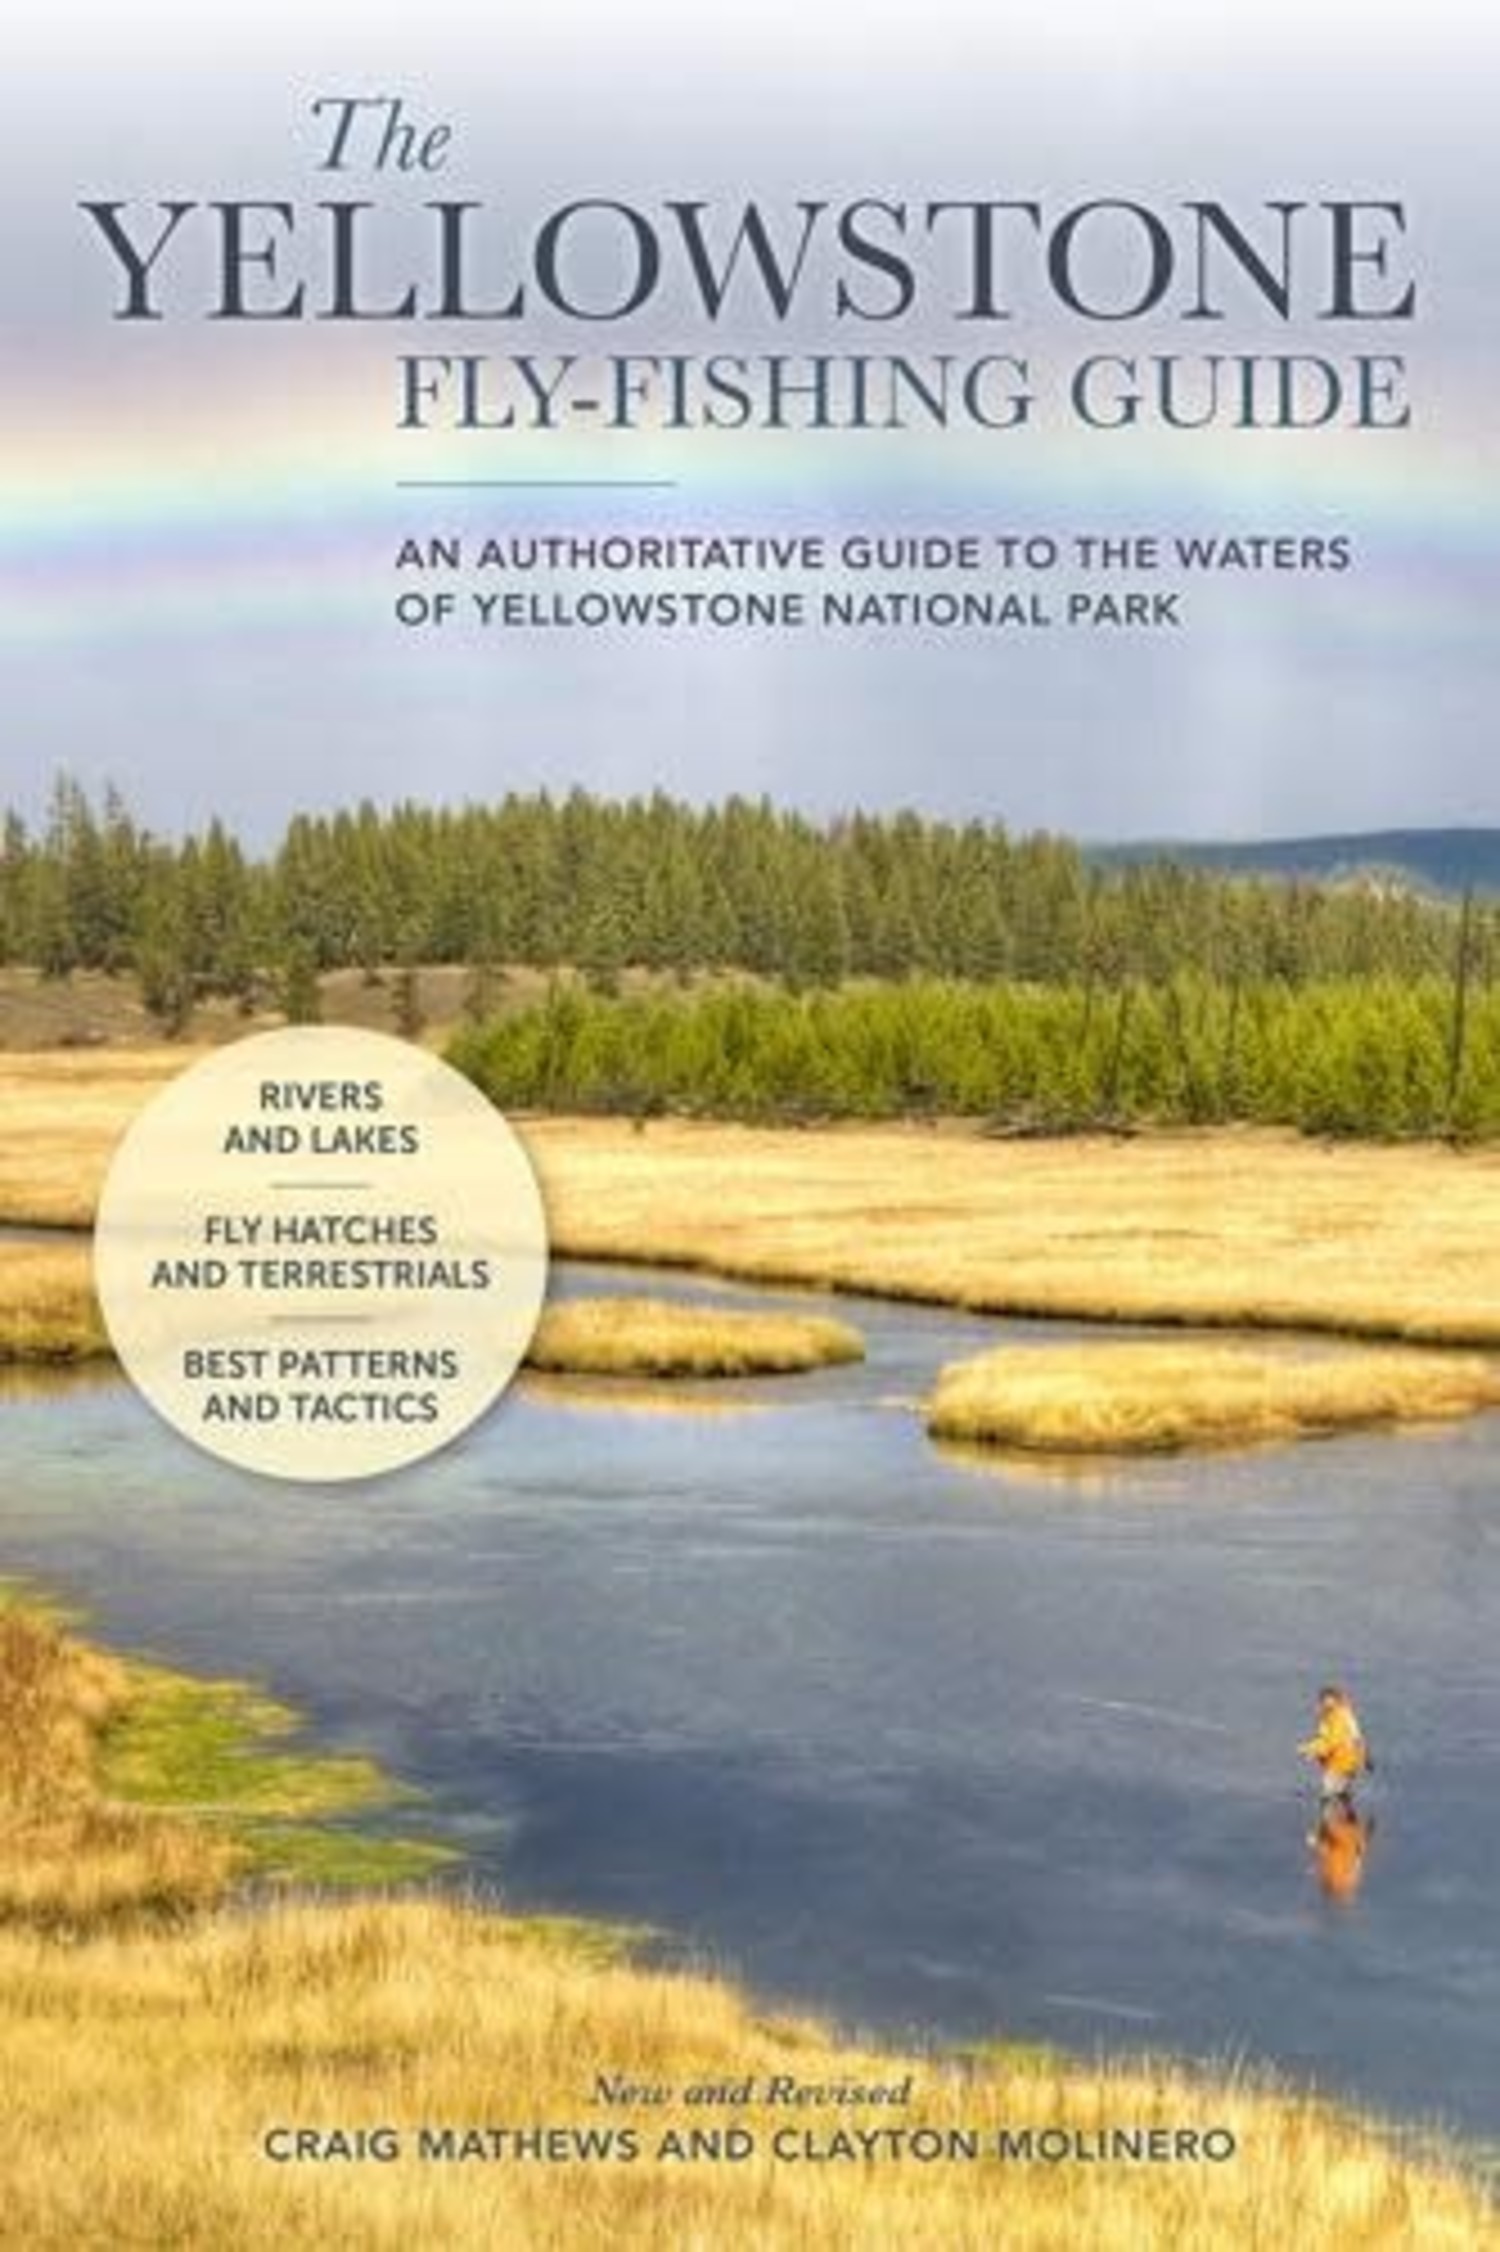 Anglers Books THE YELLOWSTONE FLY-FISHING GUIDE NEW AND REVISED